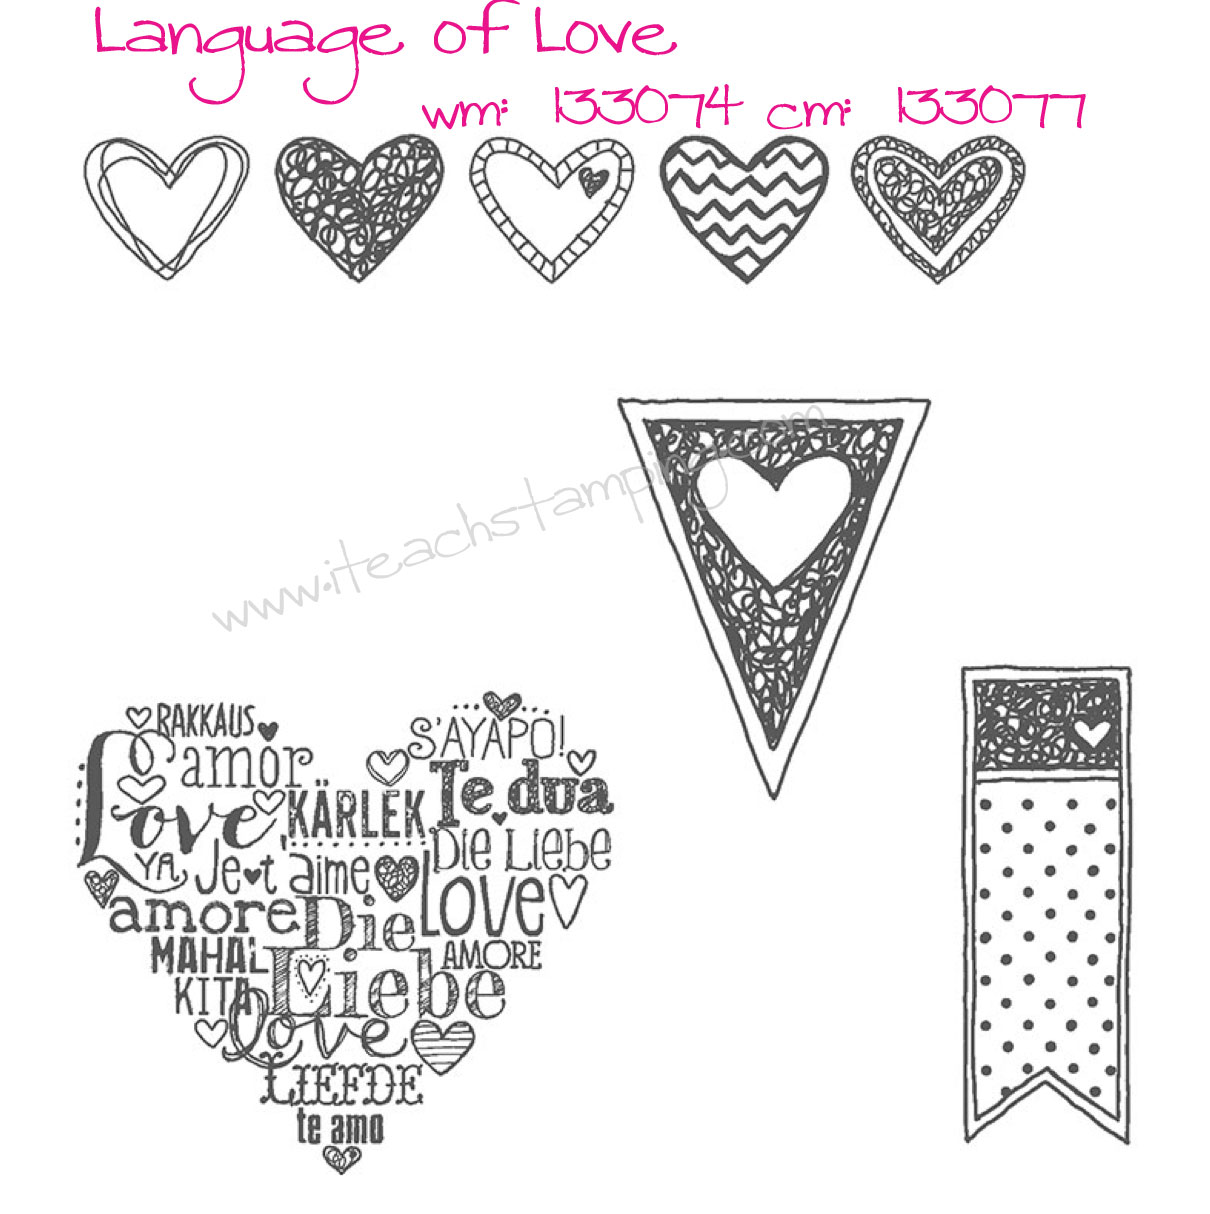 Stampin' Up!'s Language of Love - Very Overlooked Stamp Set!